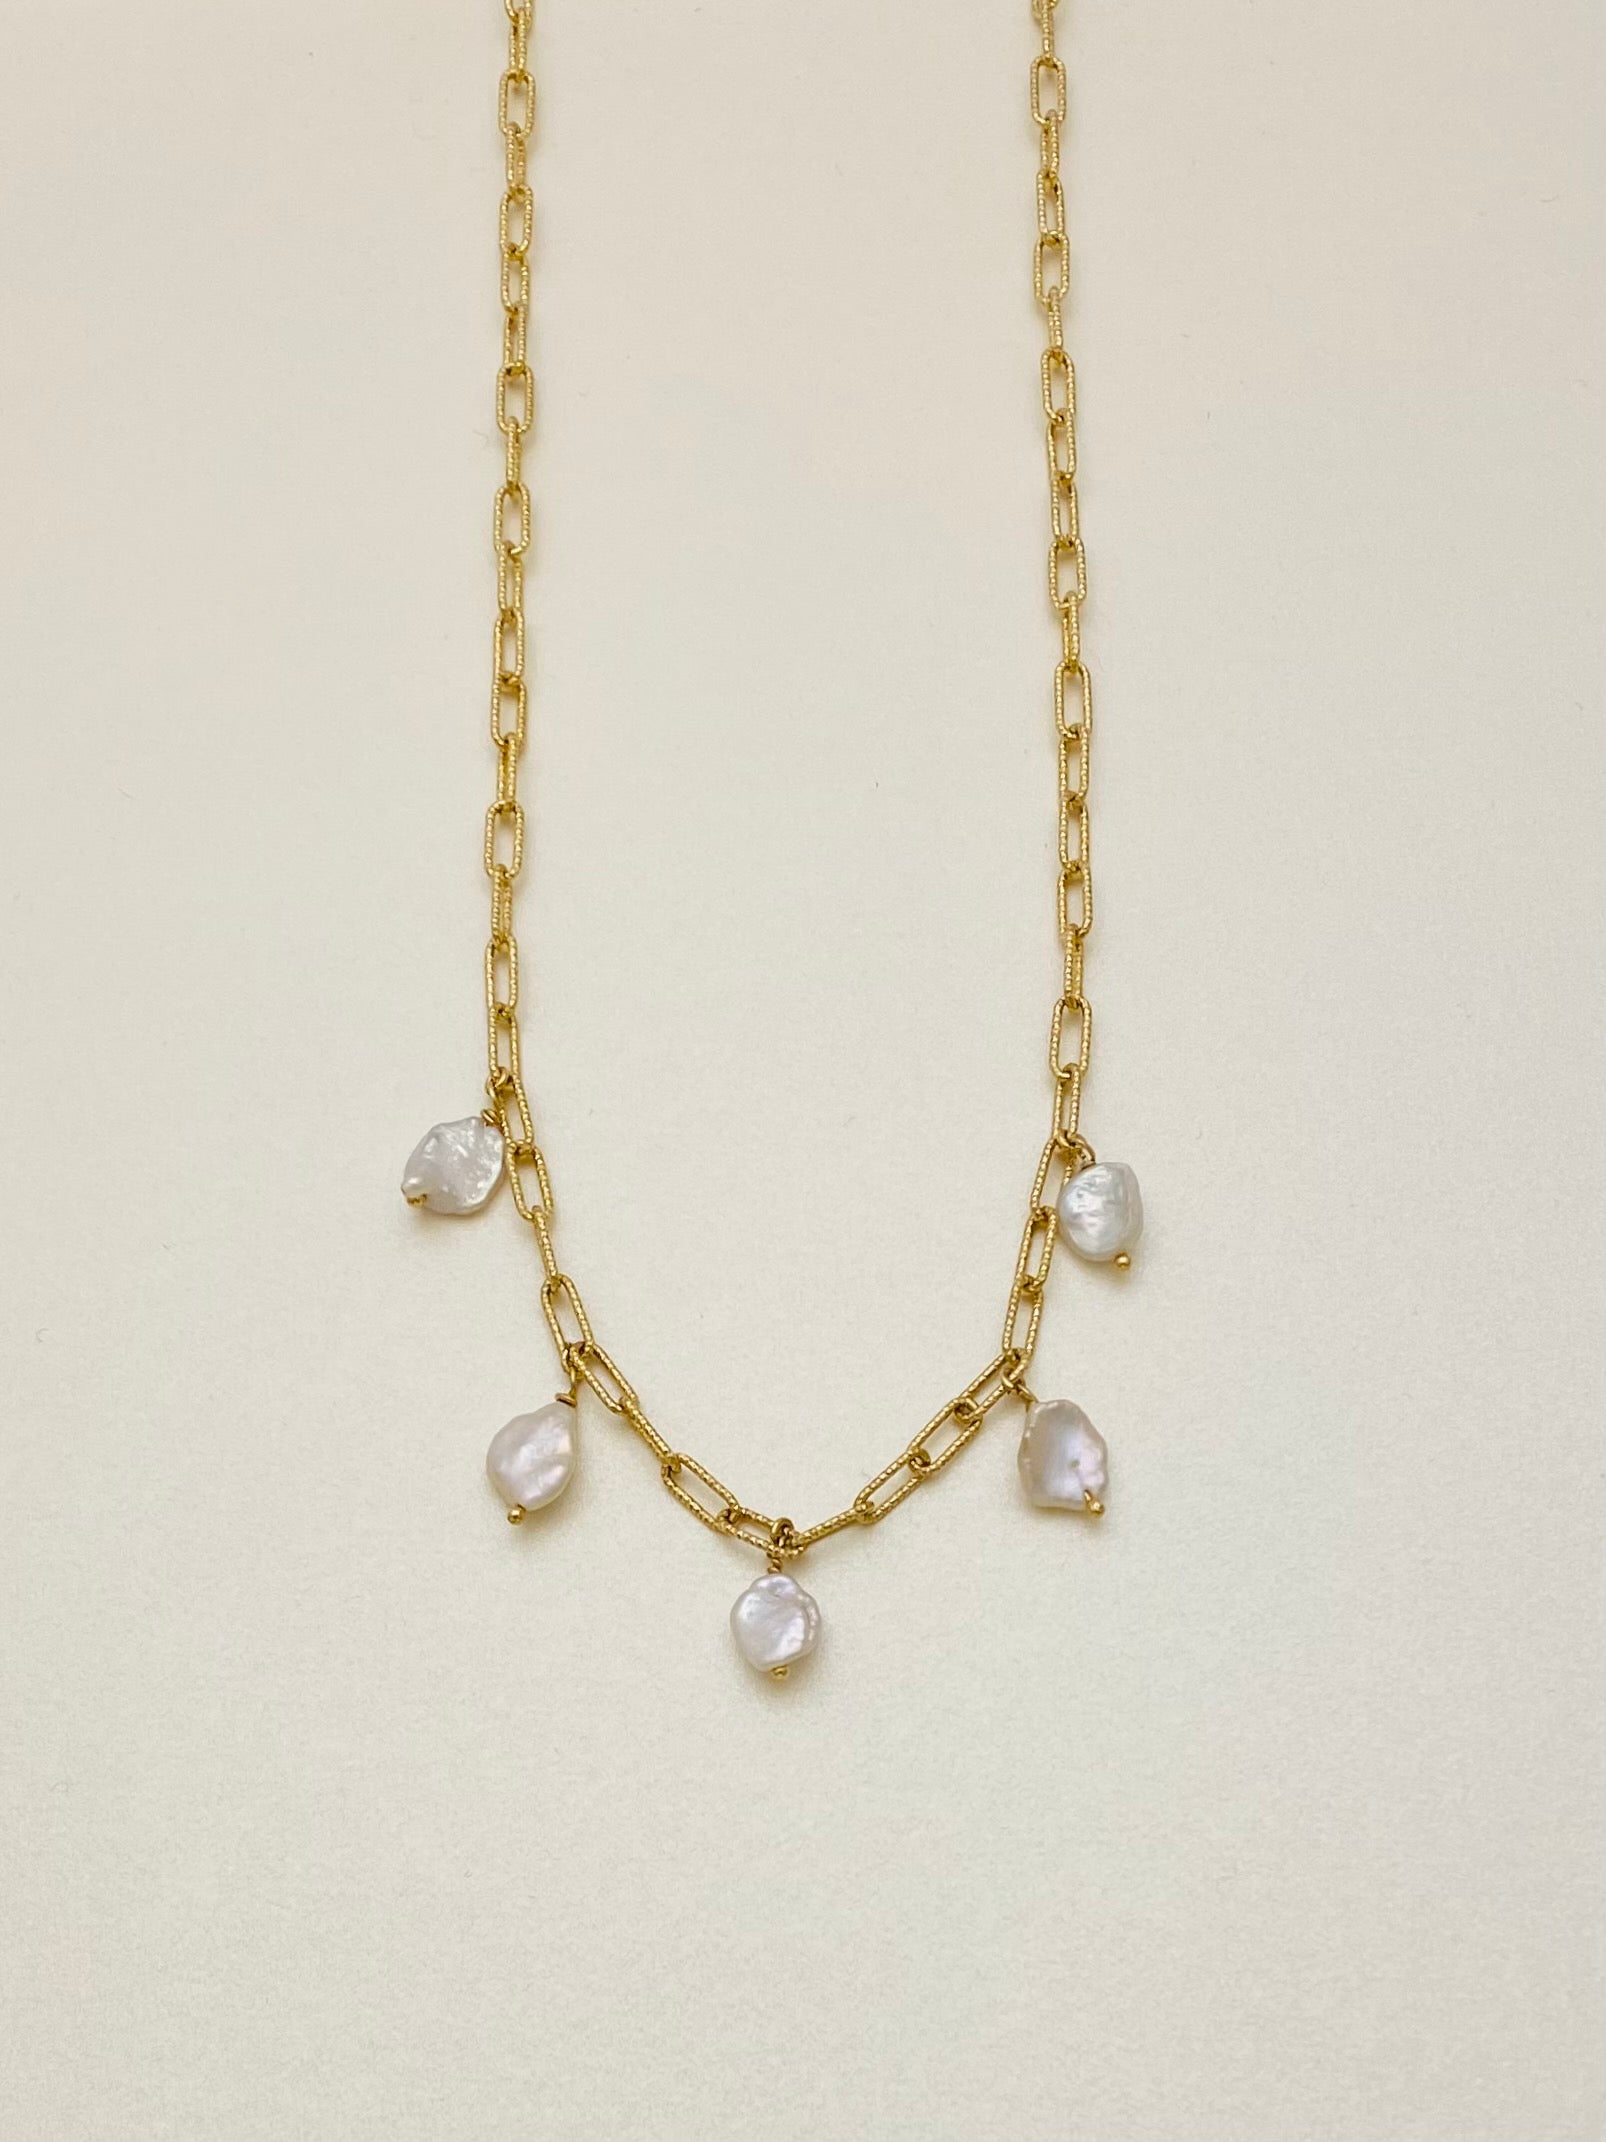 Purity Necklace